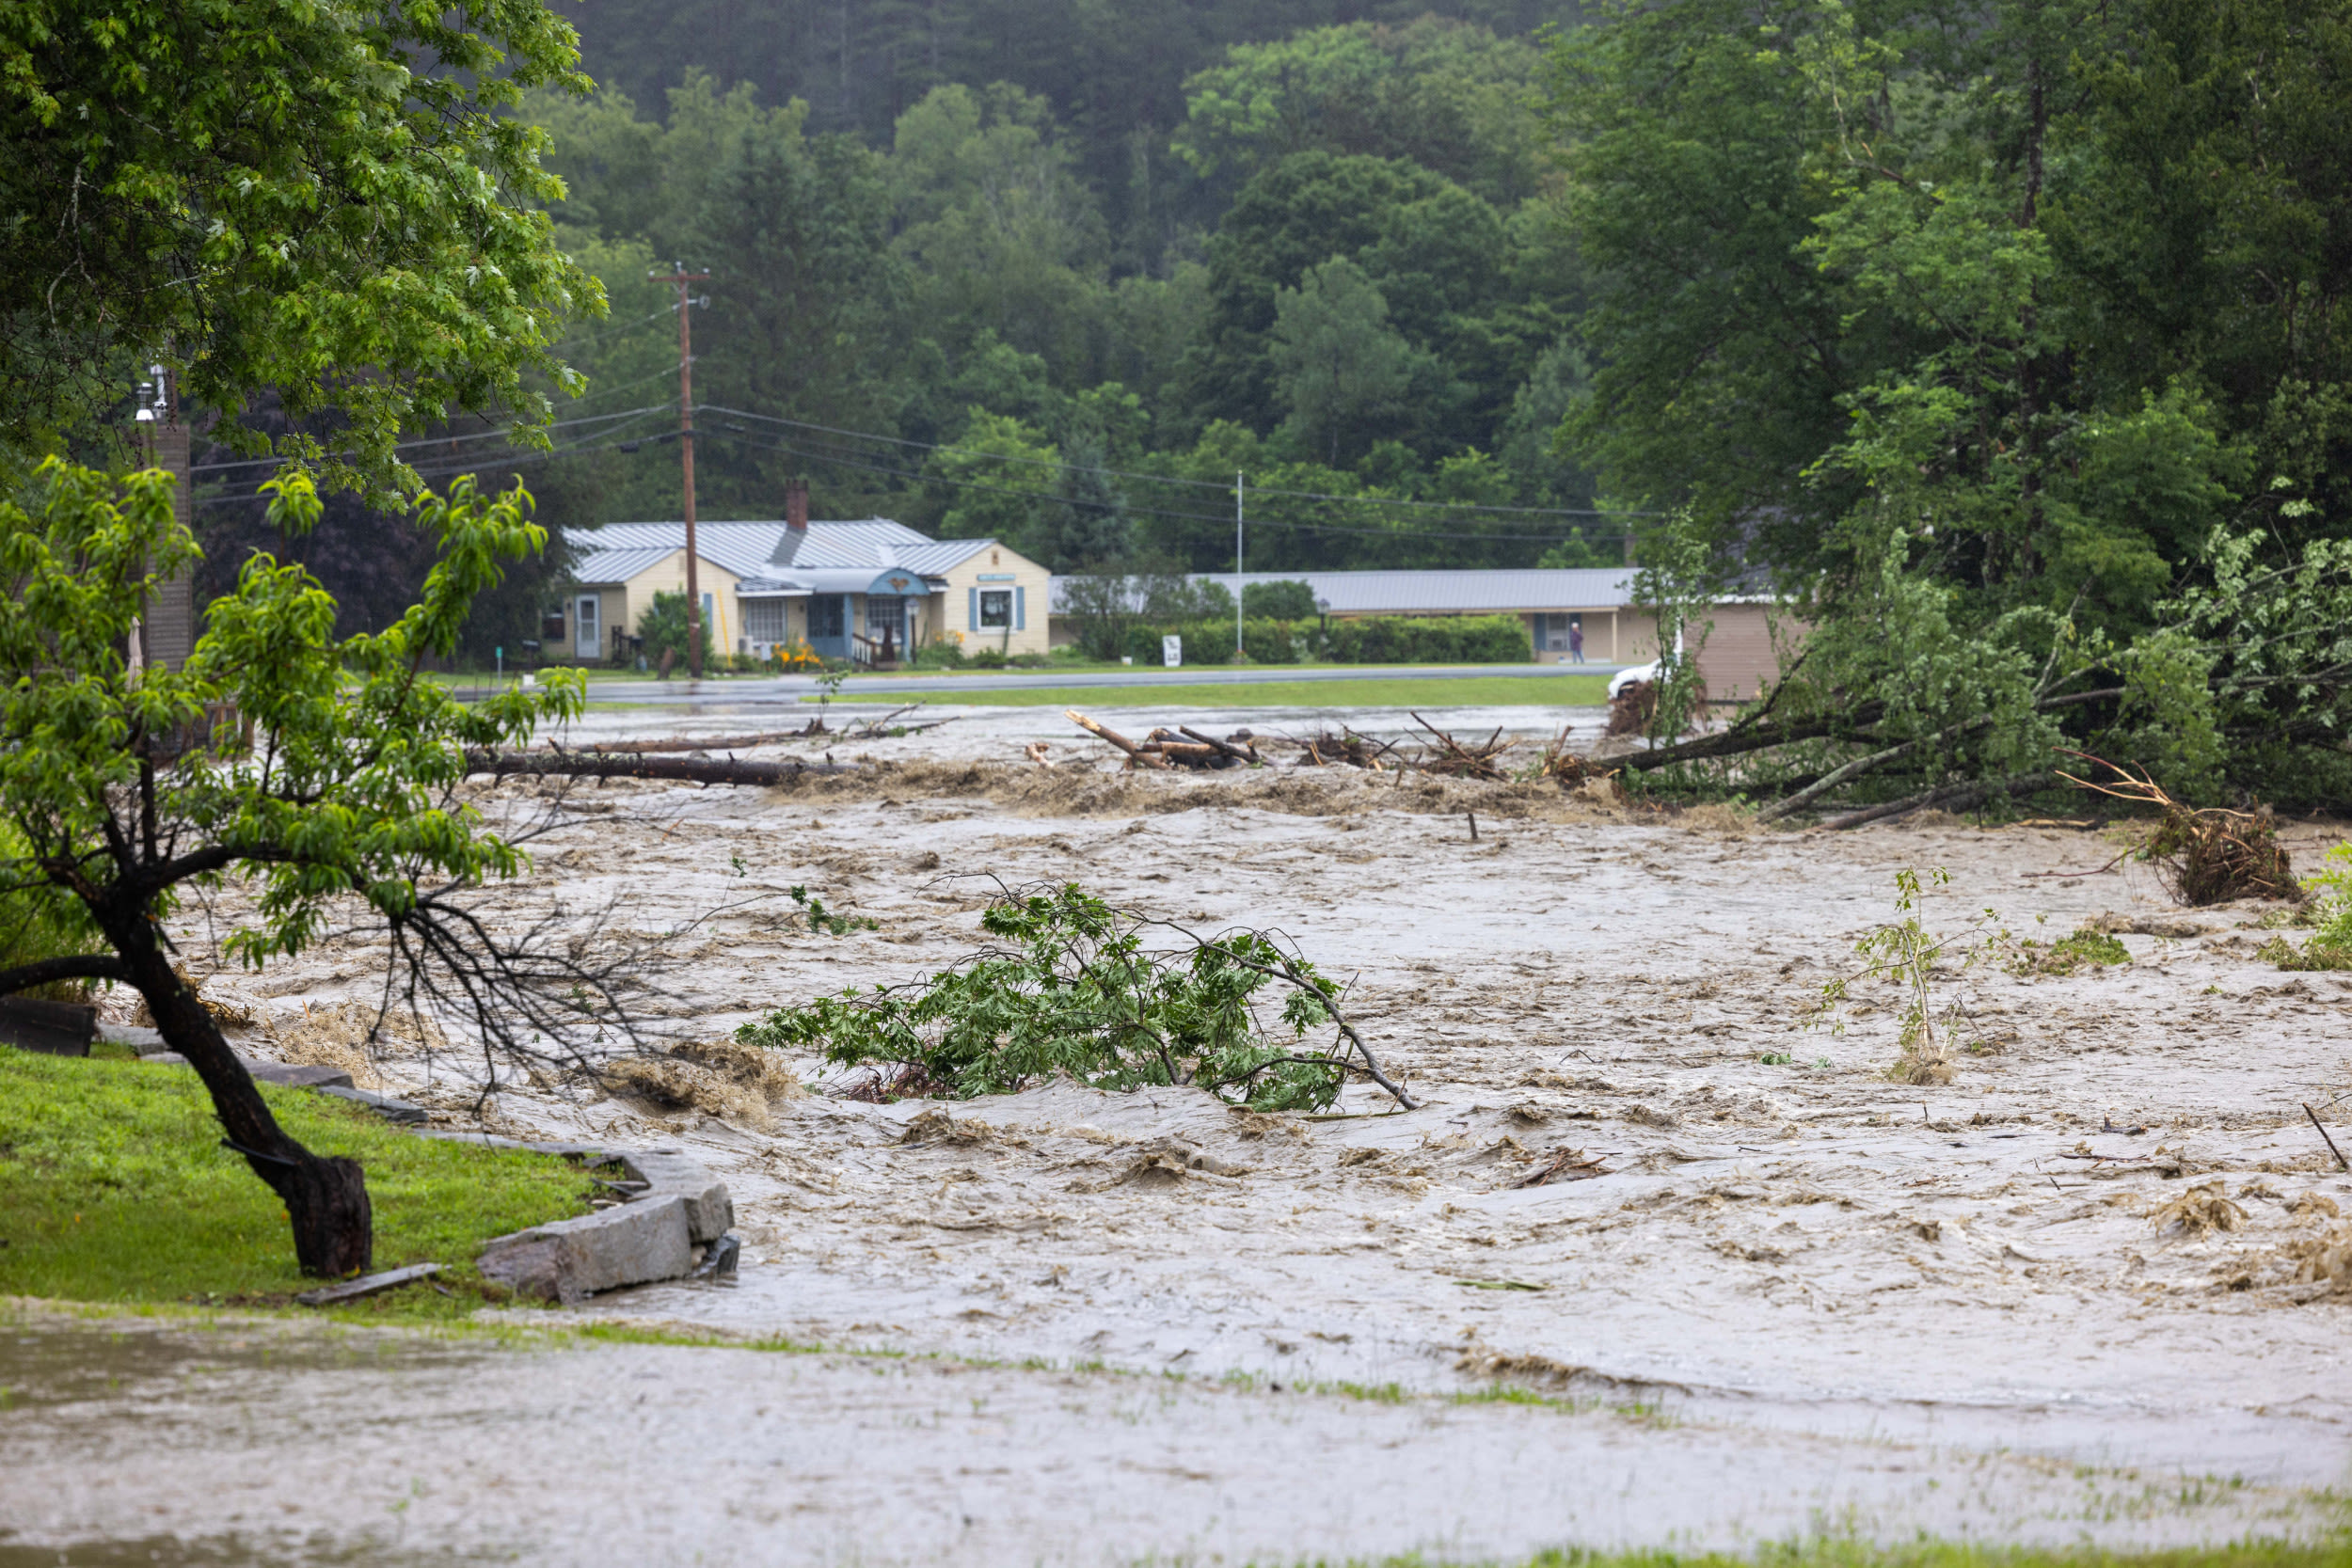 Vermont hit by 'catastrophic' flash flooding after heavy rains